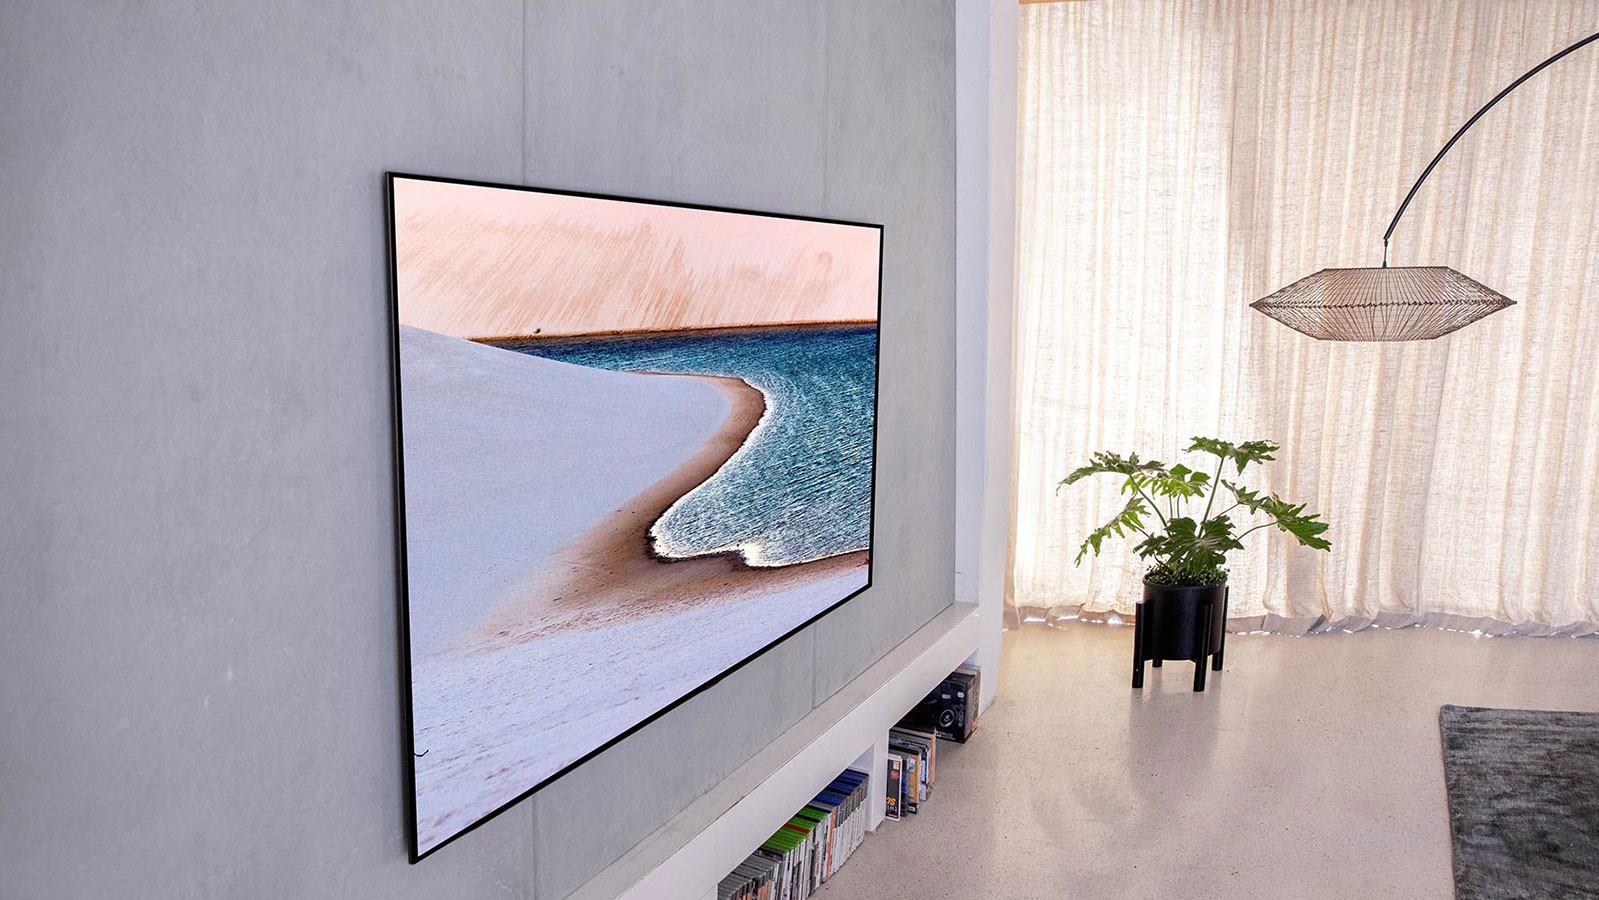 The LG Gallery Series OLED TV in a brightly lit living room with a sea and beach scene displayed on the screen.